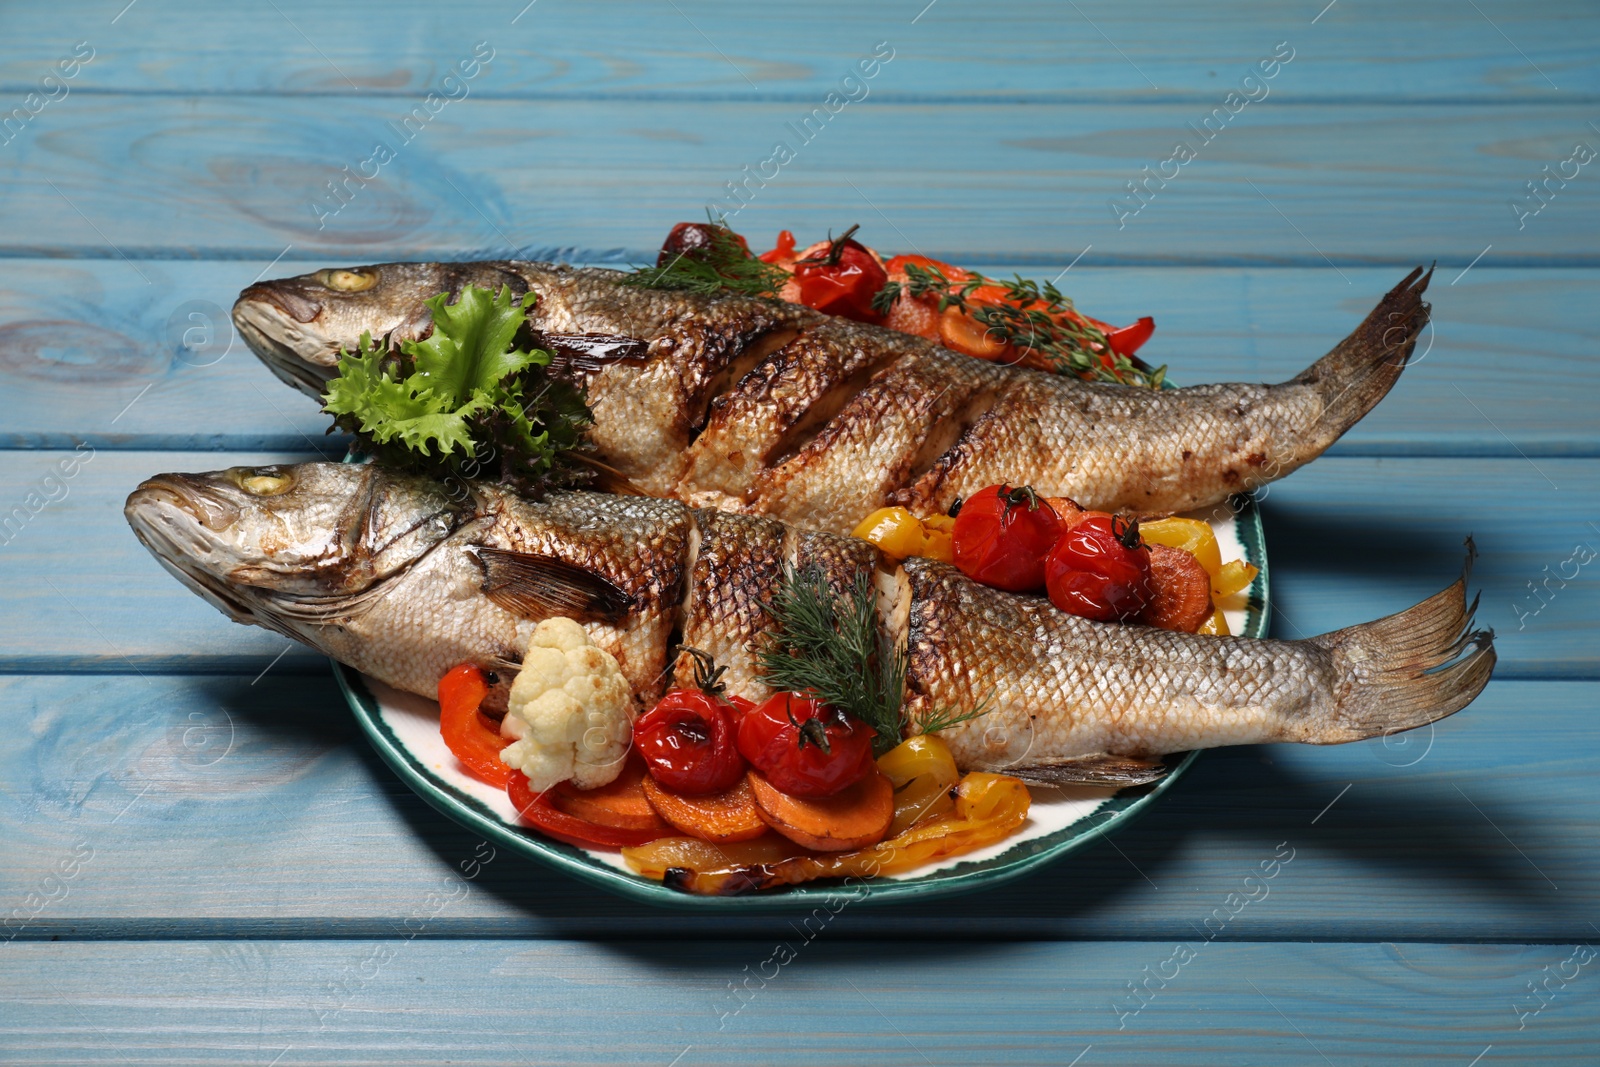 Photo of Plate with delicious baked sea bass fish and vegetables on light blue table